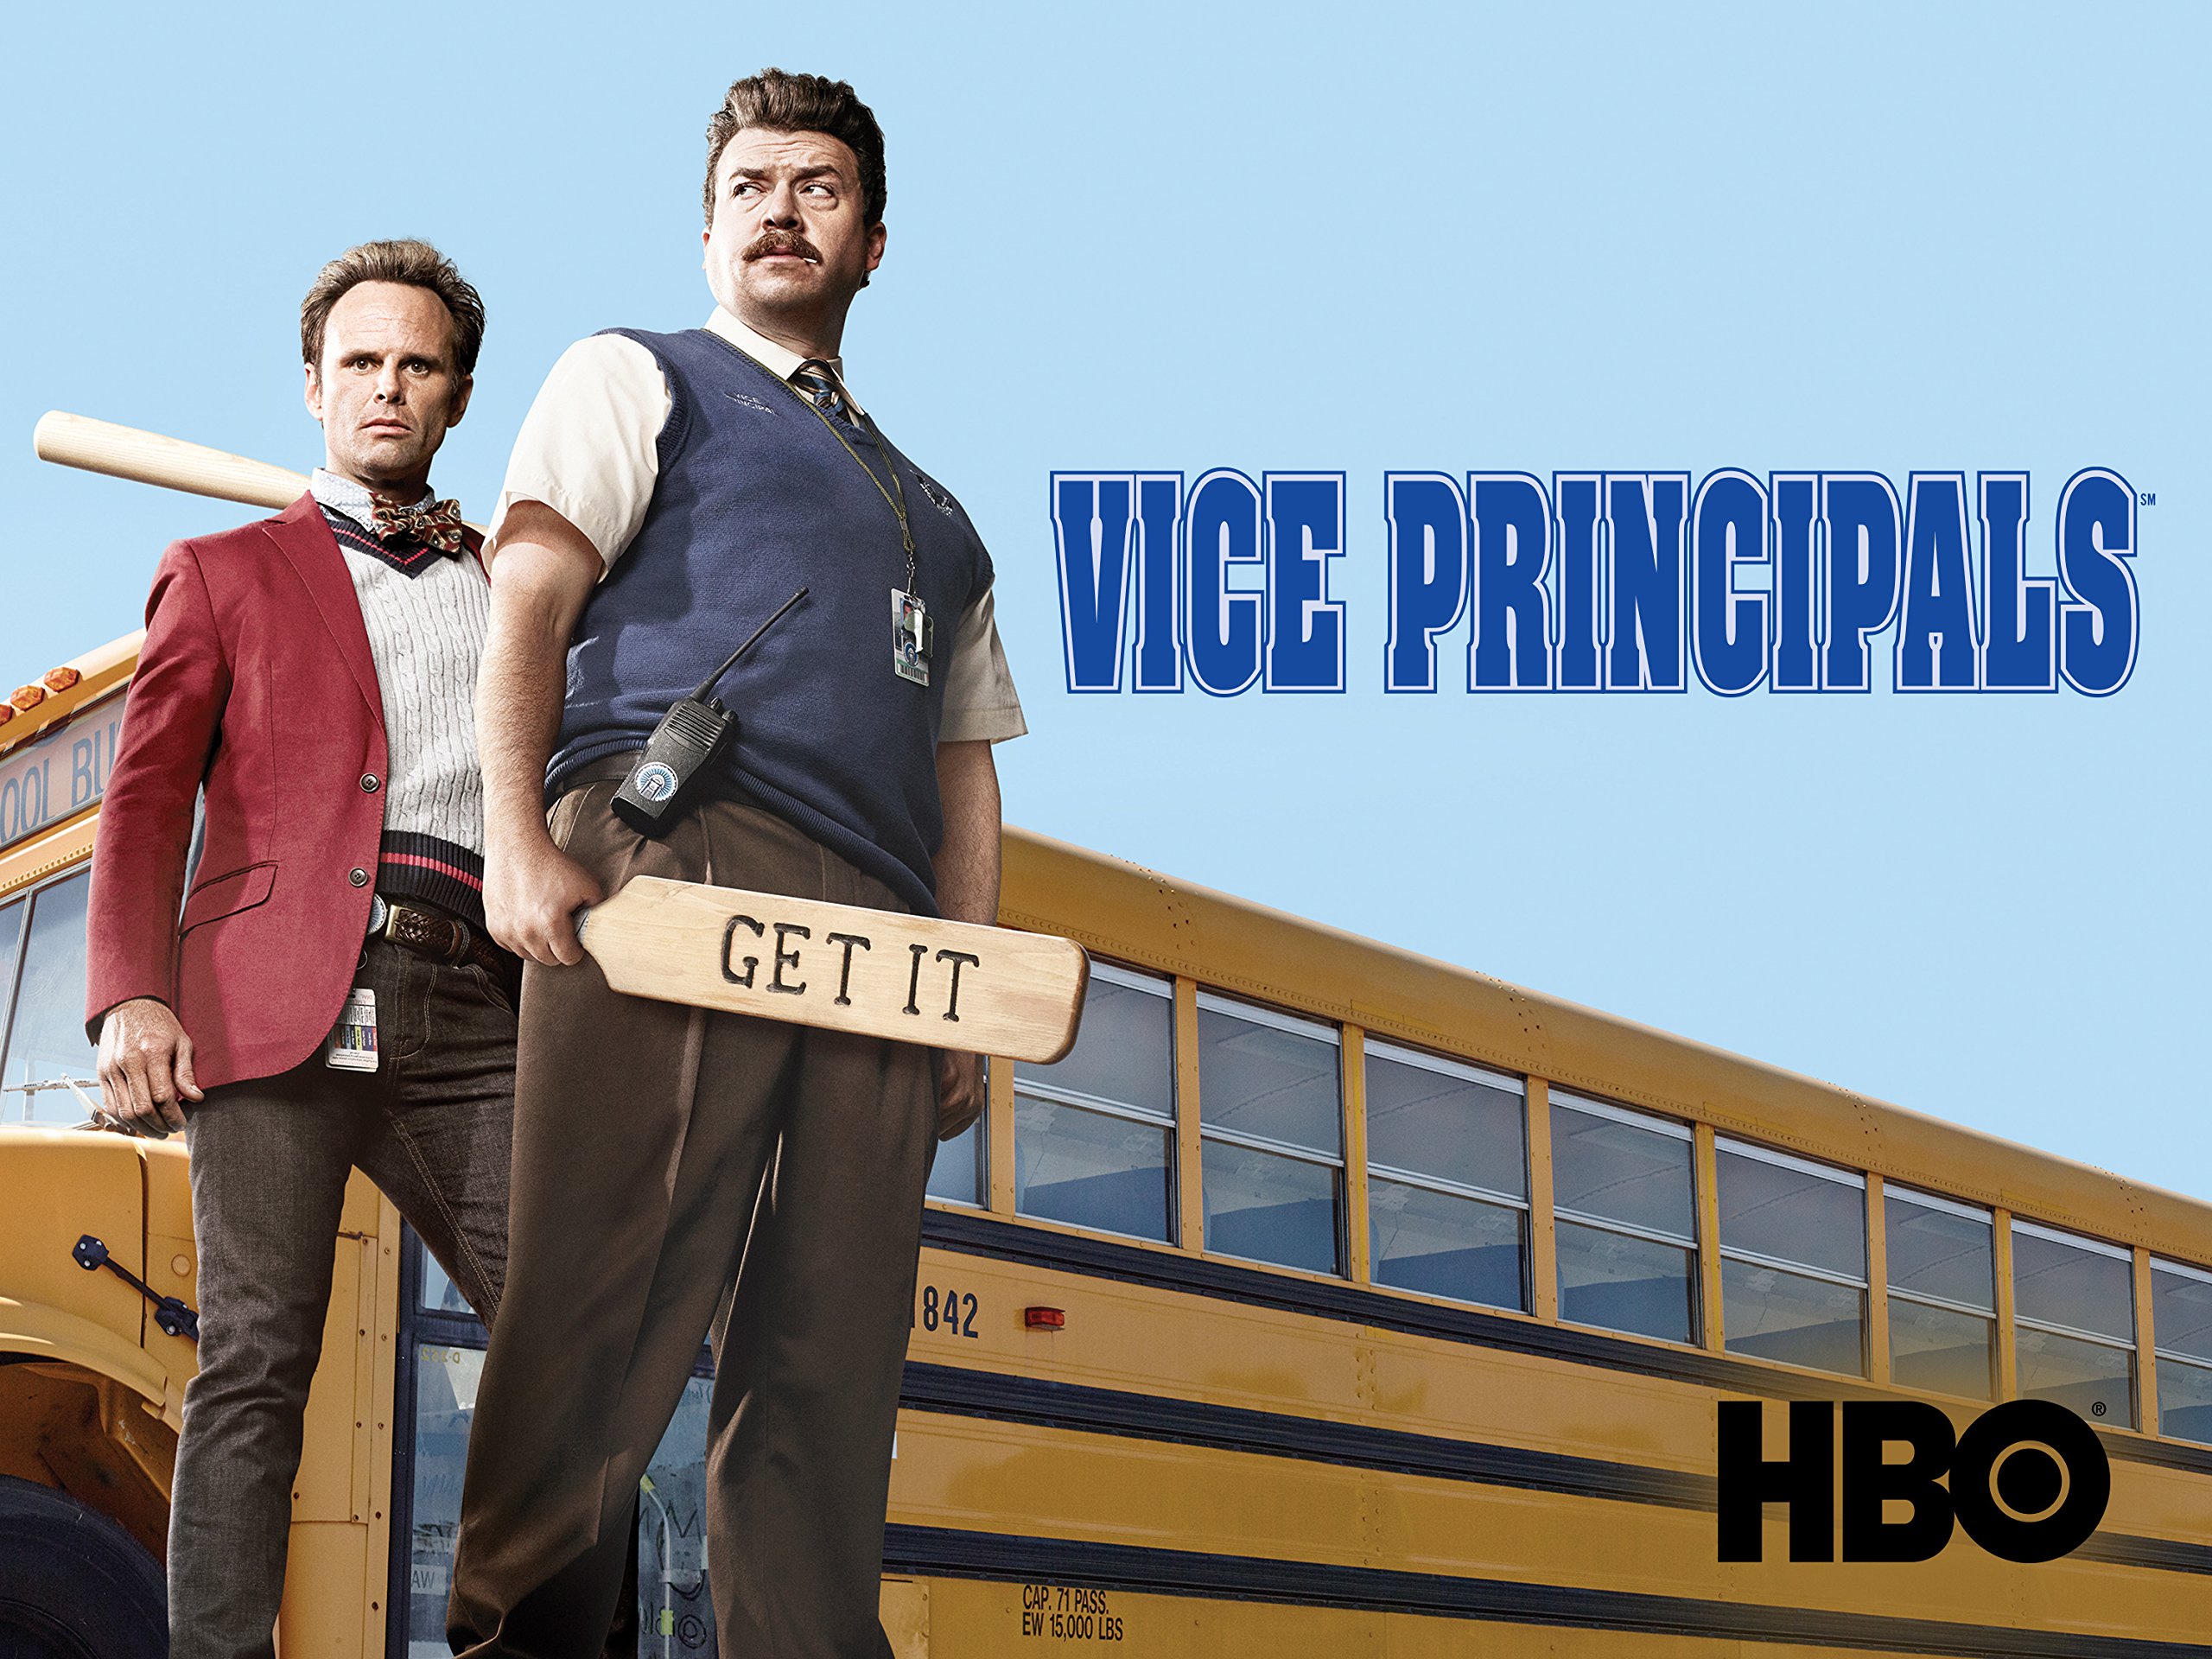 Vice Principals is an American black comedy television series starring Danny McBride, Walton Goggins, Kimberly Hébert Gregory, Dale Dickey, Georgia King